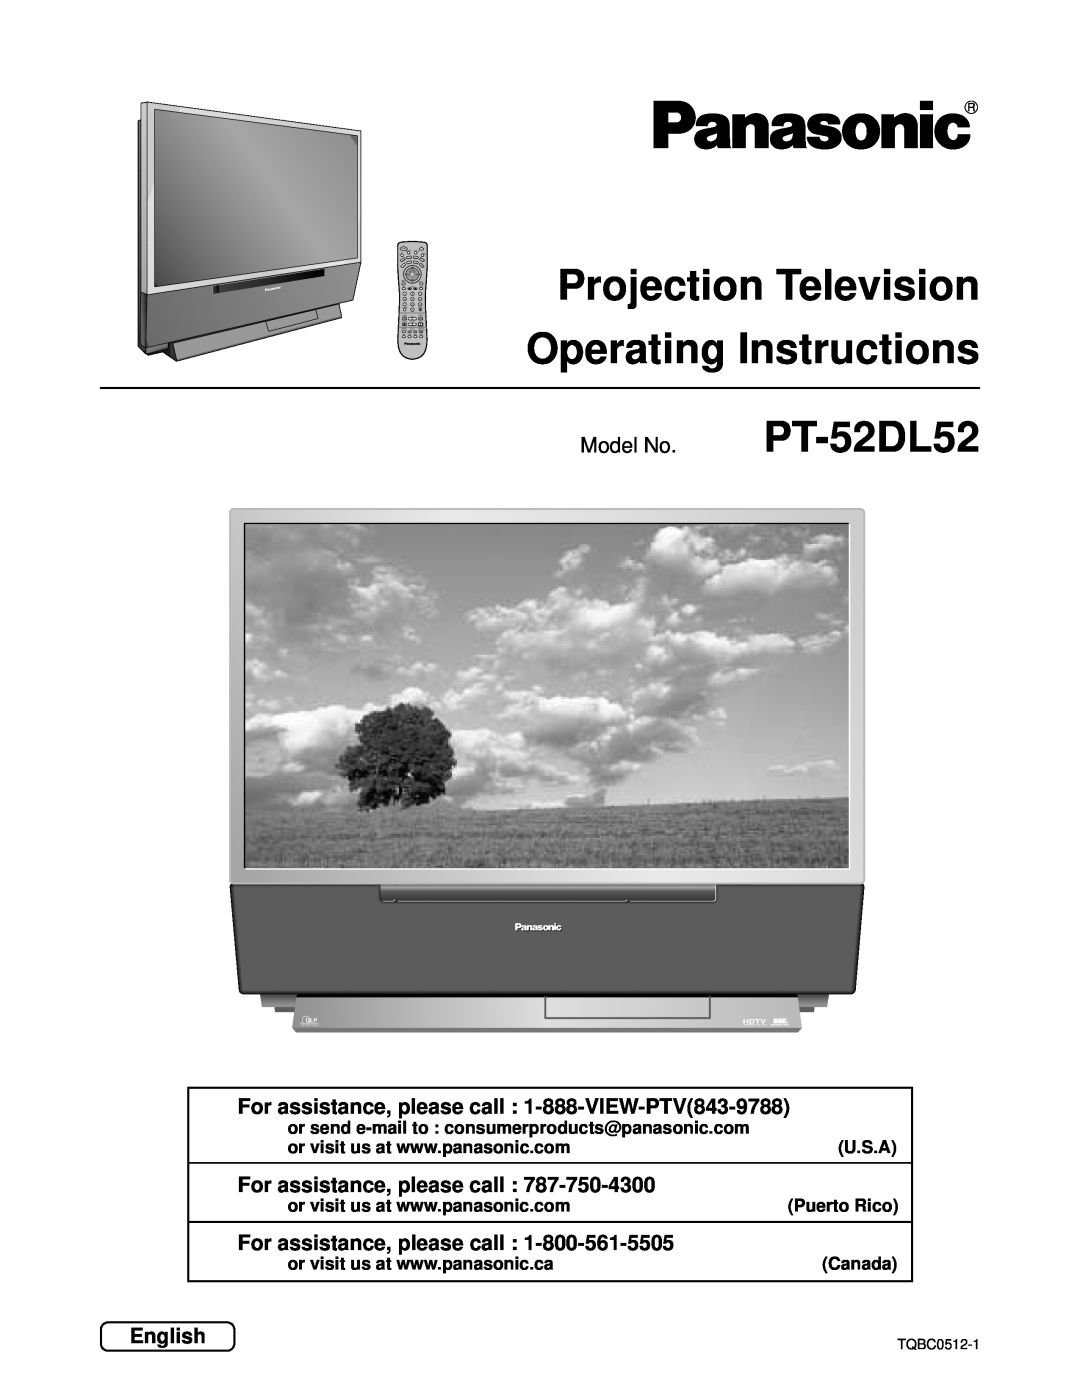 Panasonic PT 52DL52 manual For assistance, please call 1-888-VIEW-PTV843-9788, English, Model No. PT-52DL52, U.S.A, Canada 